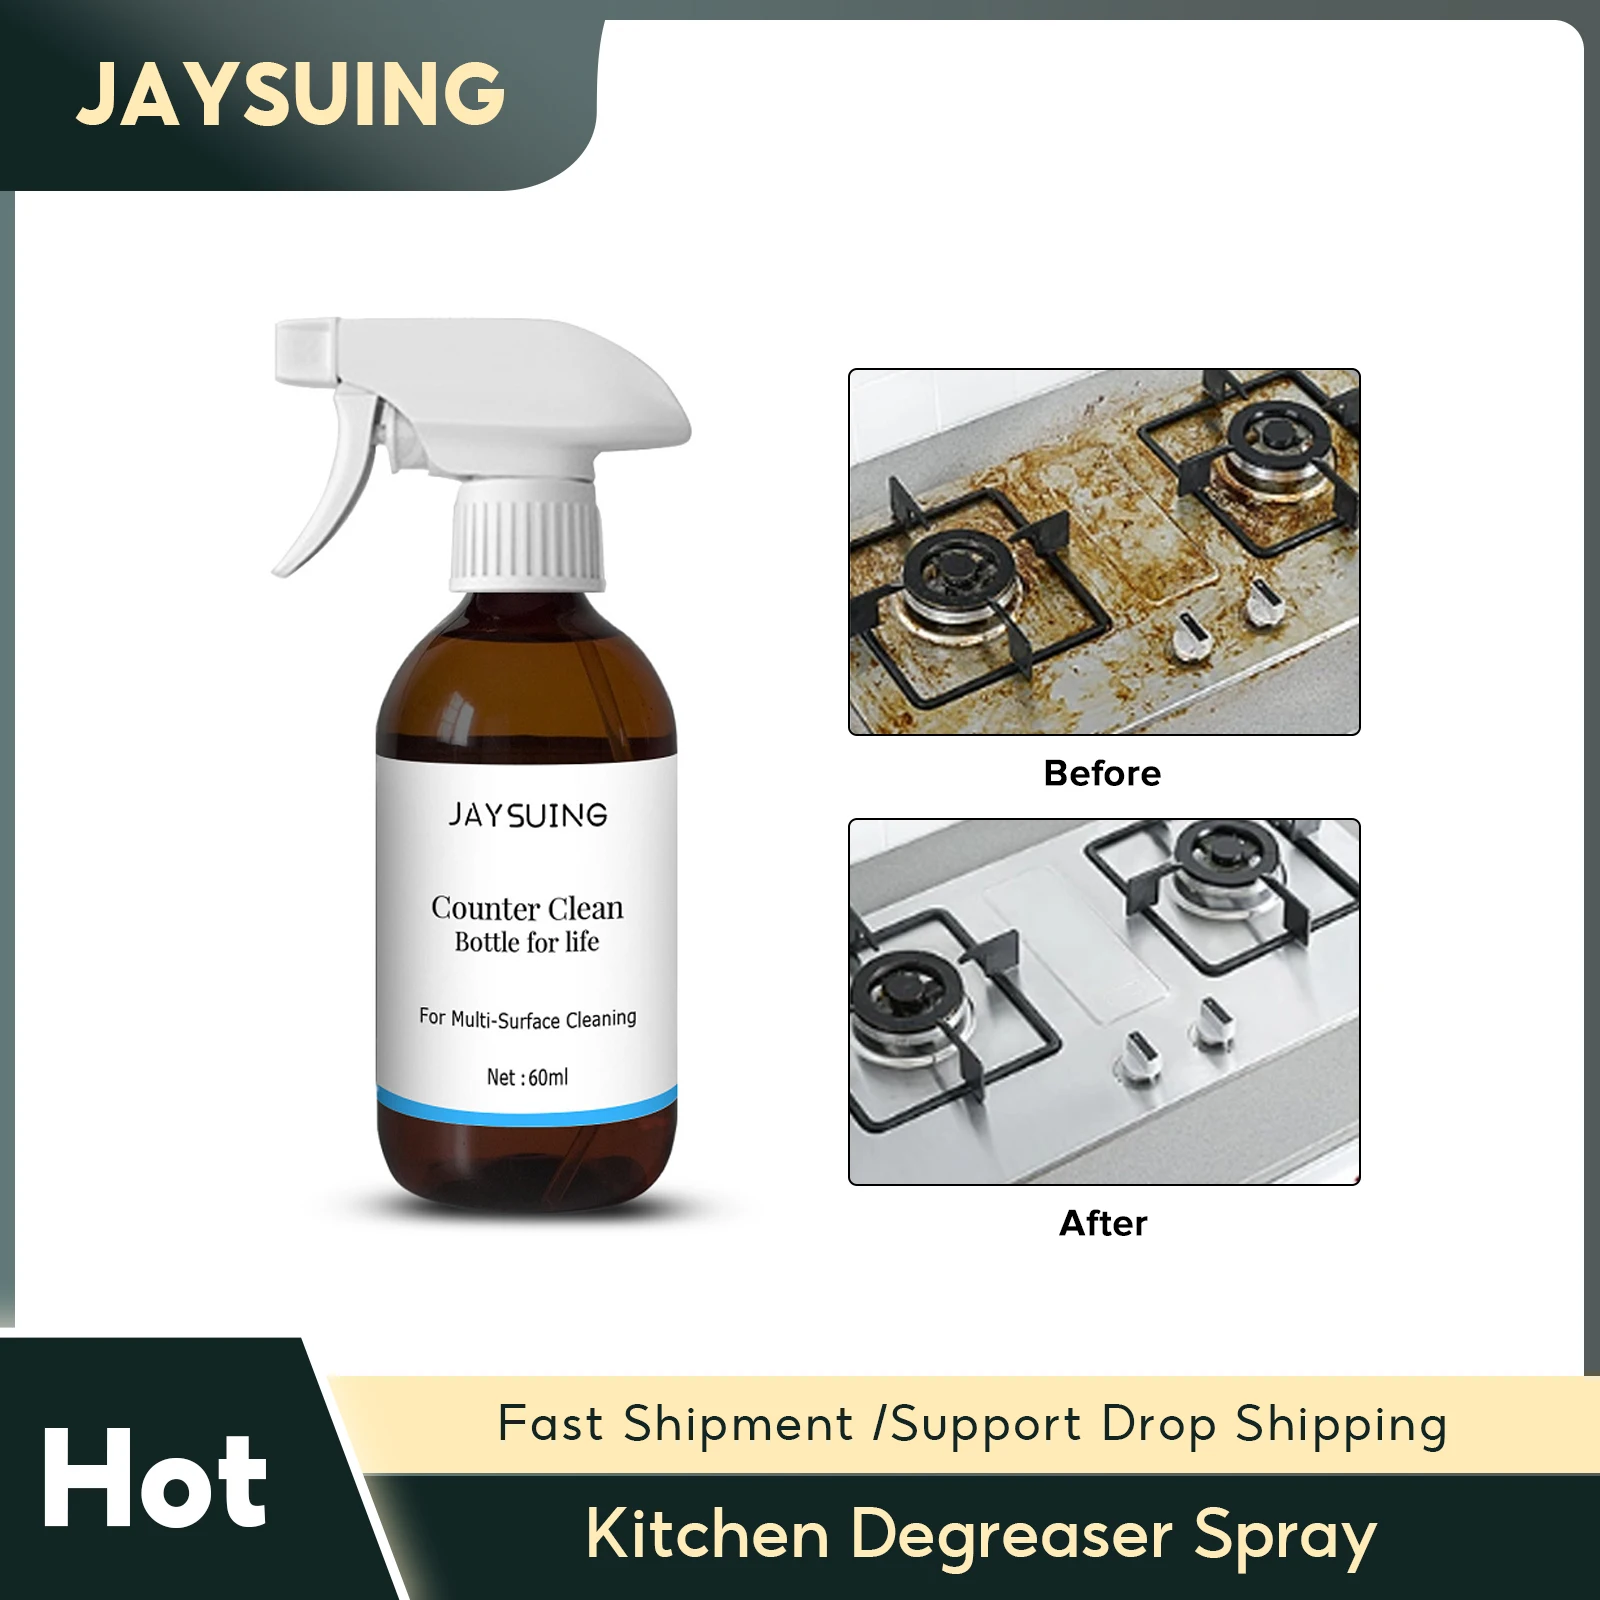 

Kitchen Degreaser Spray Heavy Oil Stain Cleaner Removes Grease Grime Agent Range Hood Cleaning Liquid All Purpose Bubble Cleaner